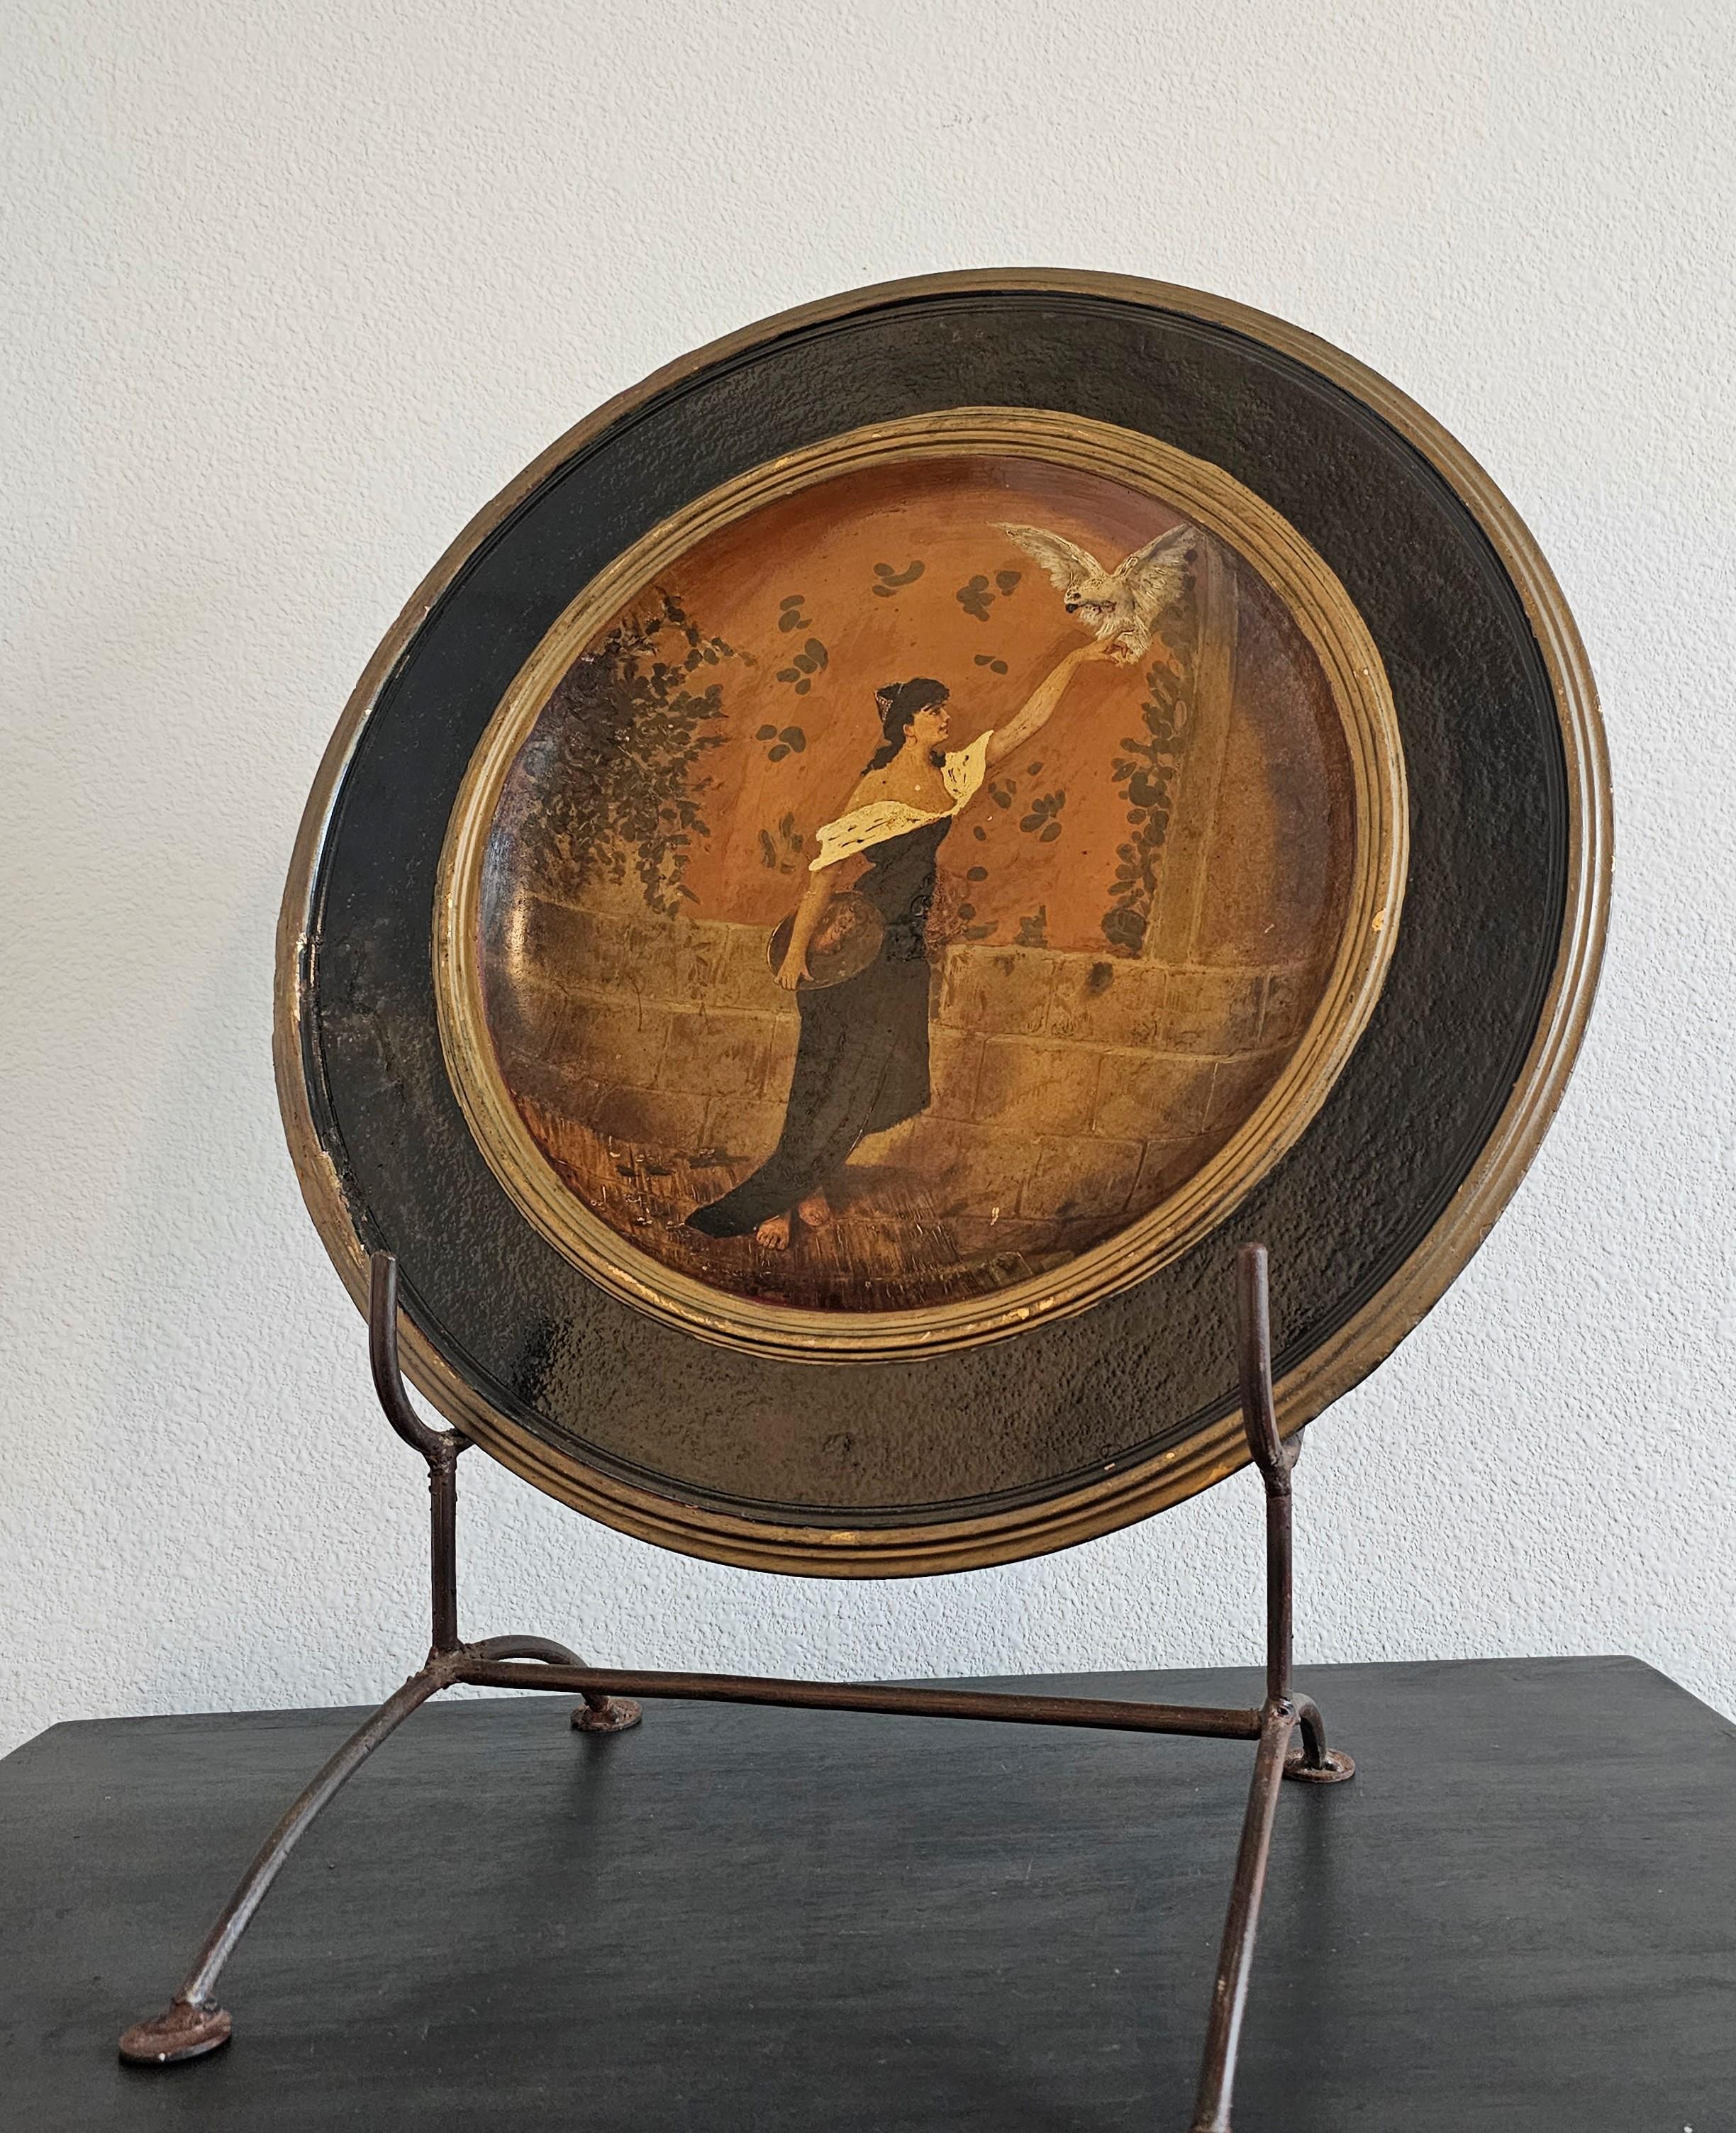 Antique German Art Nouveau Hand Painted Terracotta Charger Wall Plate In Fair Condition For Sale In Forney, TX